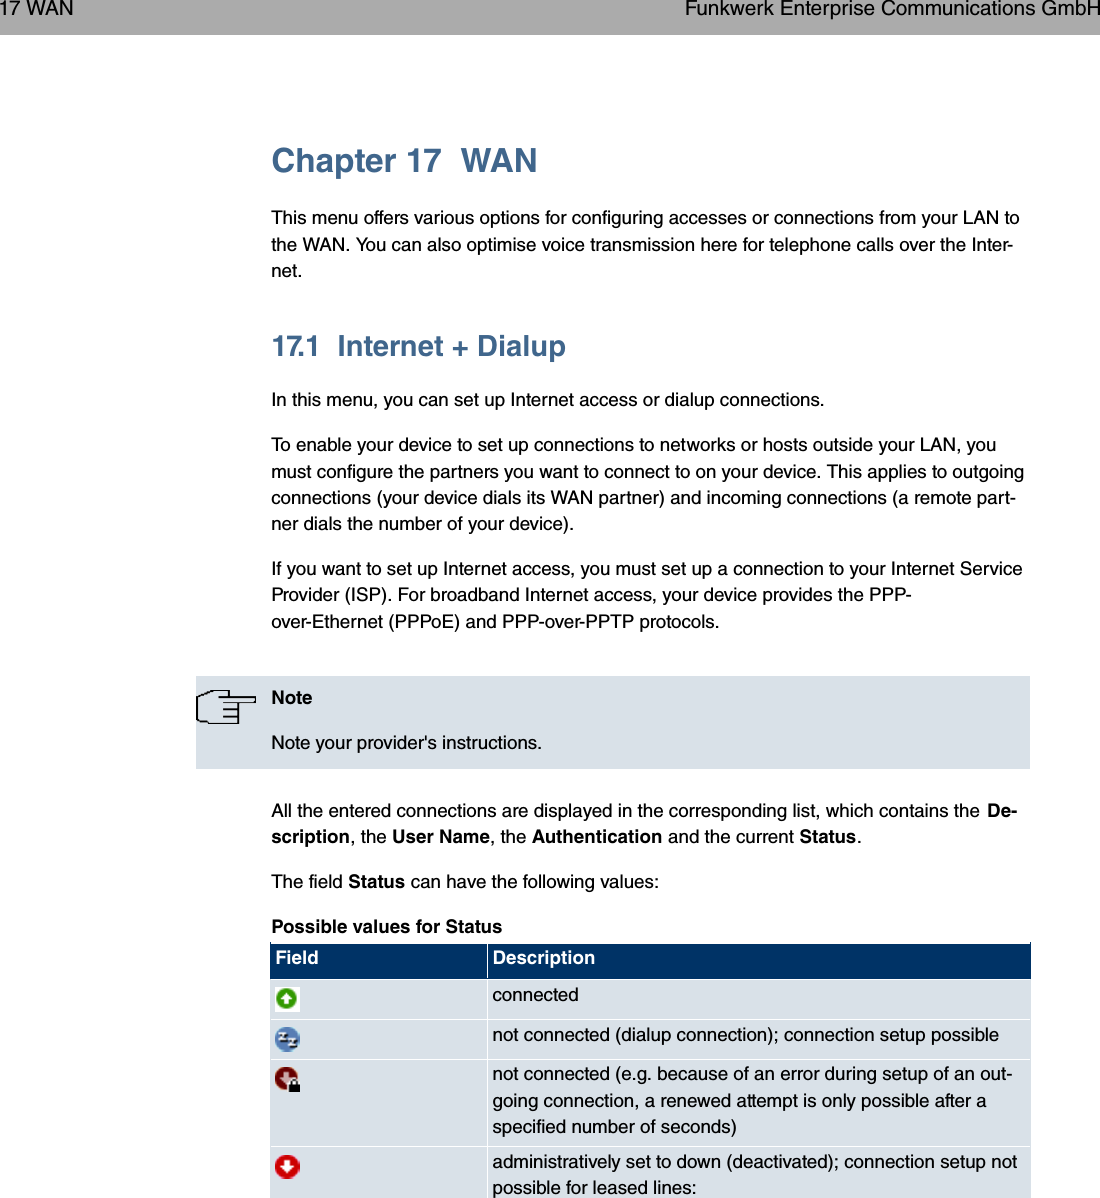 Chapter 17 WANThis menu offers various options for configuring accesses or connections from your LAN tothe WAN. You can also optimise voice transmission here for telephone calls over the Inter-net.17.1 Internet + DialupIn this menu, you can set up Internet access or dialup connections.To enable your device to set up connections to networks or hosts outside your LAN, youmust configure the partners you want to connect to on your device. This applies to outgoingconnections (your device dials its WAN partner) and incoming connections (a remote part-ner dials the number of your device).If you want to set up Internet access, you must set up a connection to your Internet ServiceProvider (ISP). For broadband Internet access, your device provides the PPP-over-Ethernet (PPPoE) and PPP-over-PPTP protocols.NoteNote your provider&apos;s instructions.All the entered connections are displayed in the corresponding list, which contains the De-scription, the User Name, the Authentication and the current Status.The field Status can have the following values:Possible values for StatusField Descriptionconnectednot connected (dialup connection); connection setup possiblenot connected (e.g. because of an error during setup of an out-going connection, a renewed attempt is only possible after aspecified number of seconds)administratively set to down (deactivated); connection setup notpossible for leased lines:17 WAN Funkwerk Enterprise Communications GmbH216 bintec WLAN and Industrial WLAN